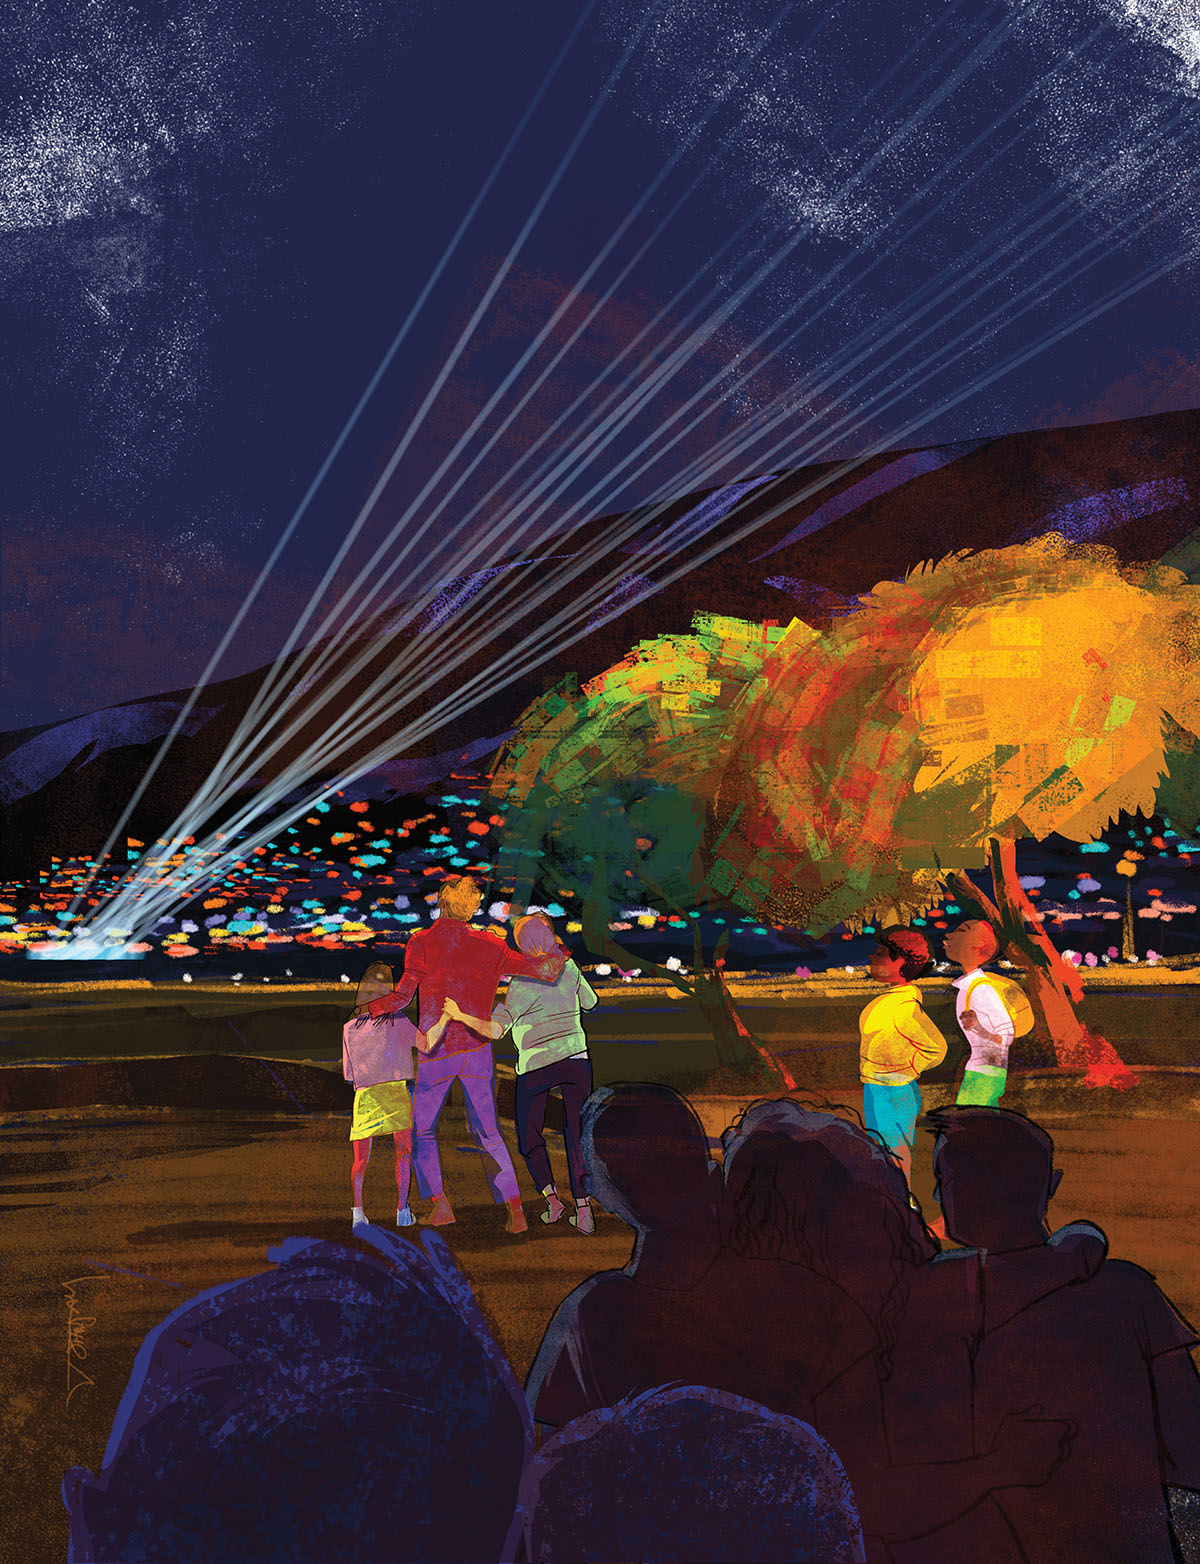 An illustration of a group of people looking at lights in a nighttime scene